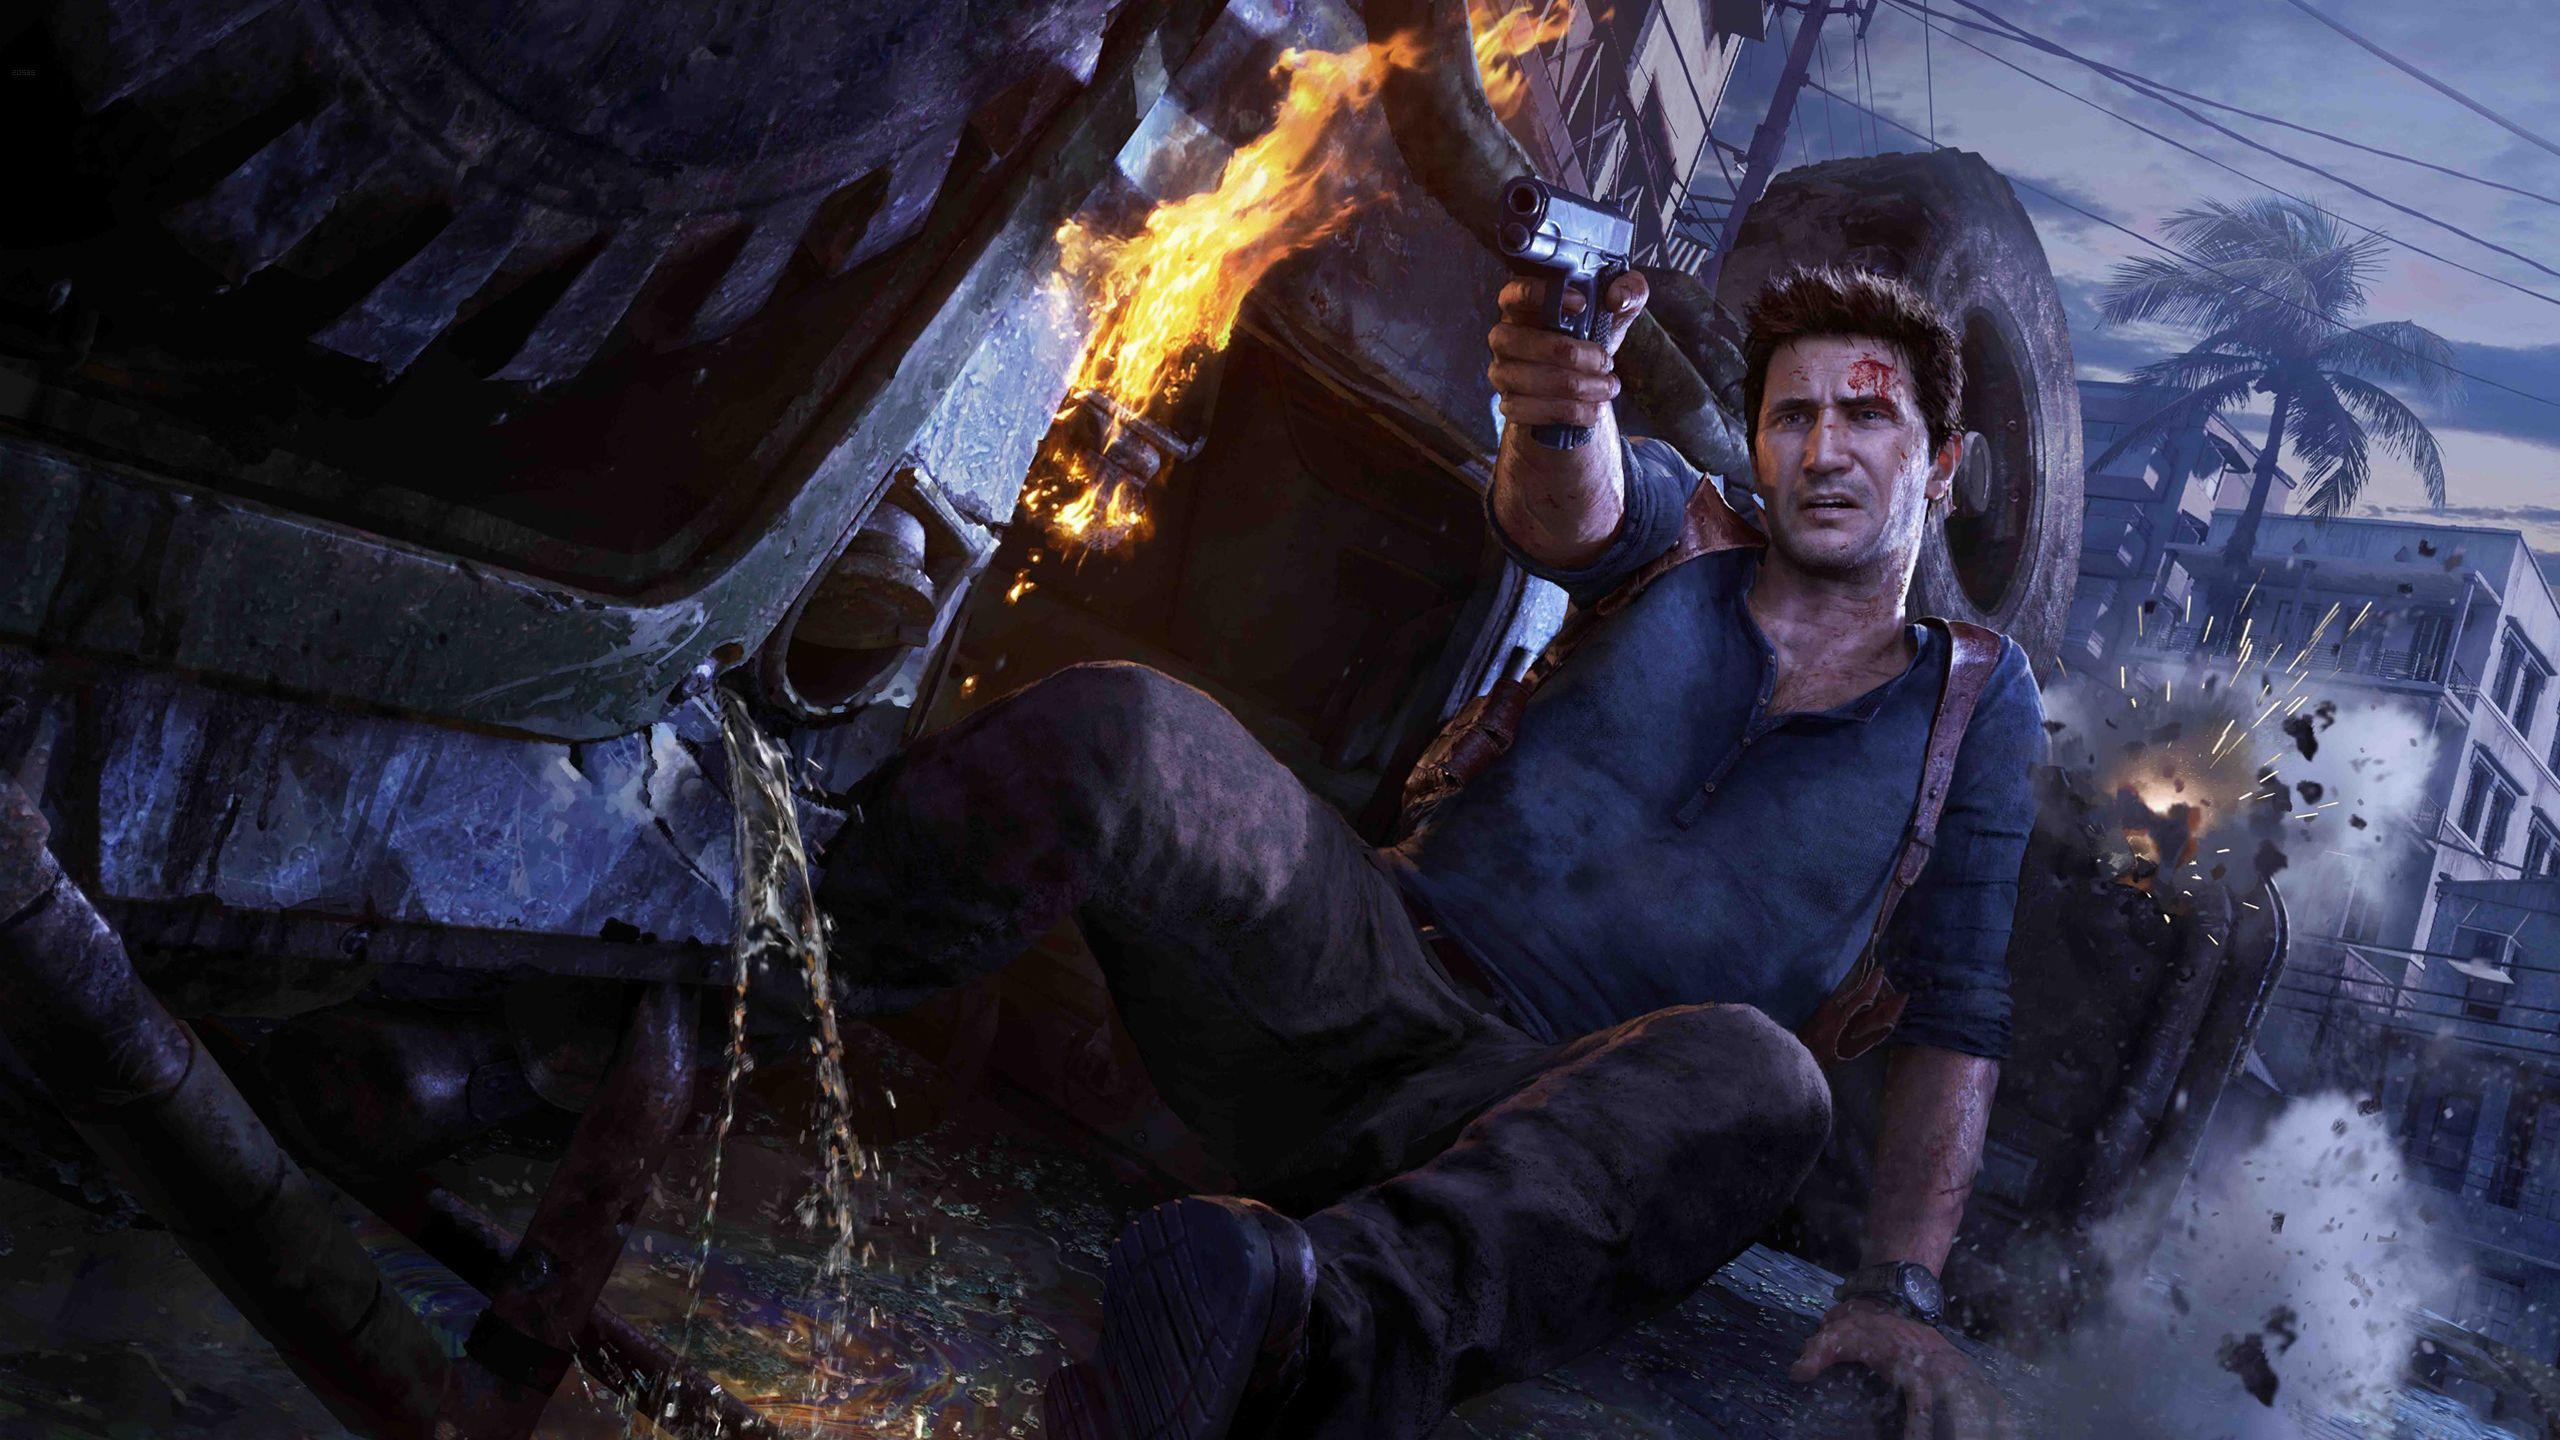 Uncharted cool wallpaper